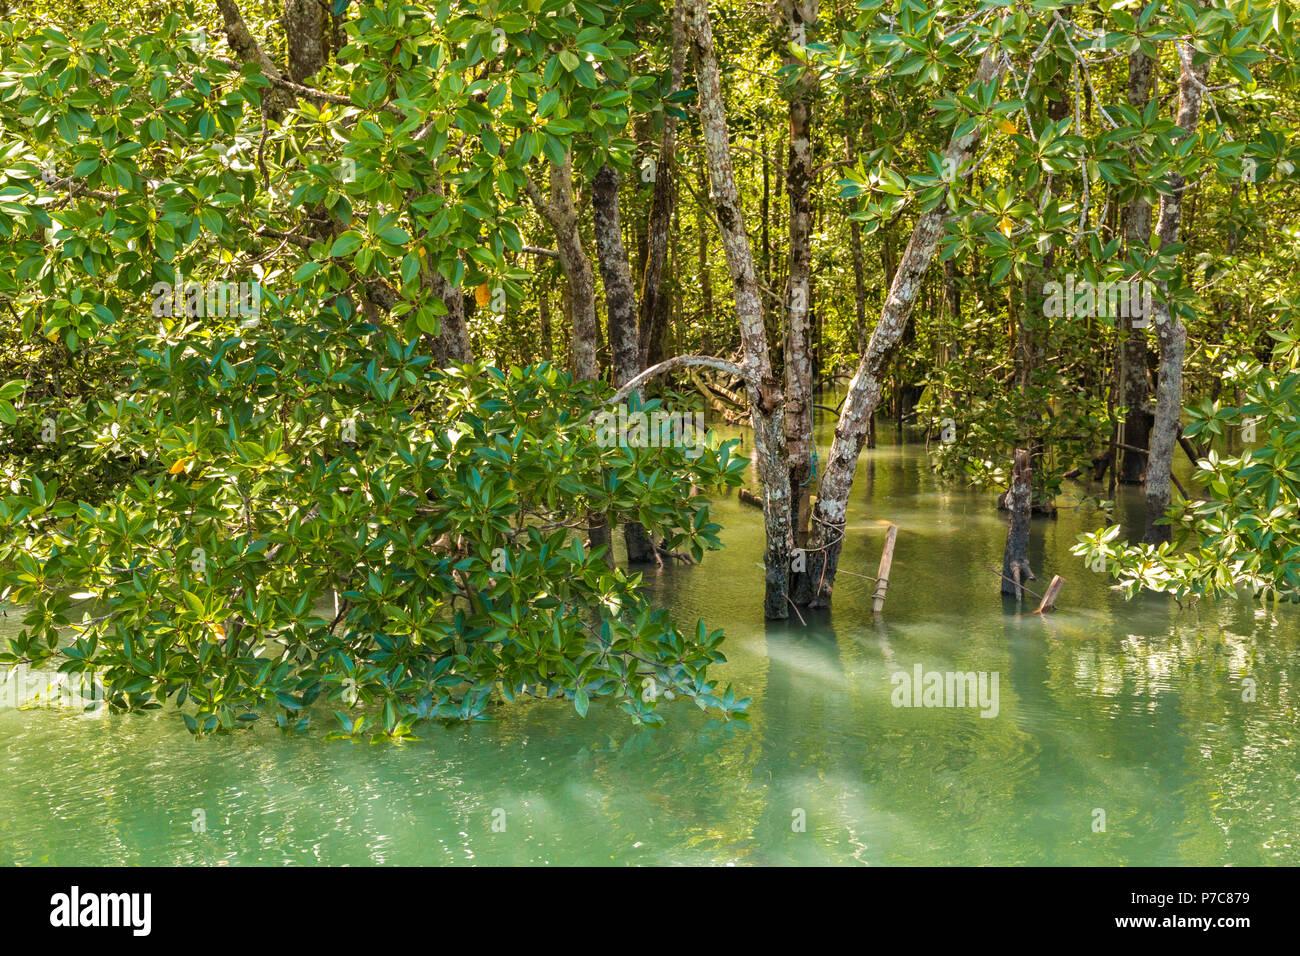 A dense forest of salt-tolerant mangrove trees of the Rhizophoraceae family with white bark and thick leathery leaves, flooded by turquoise water in... Stock Photo